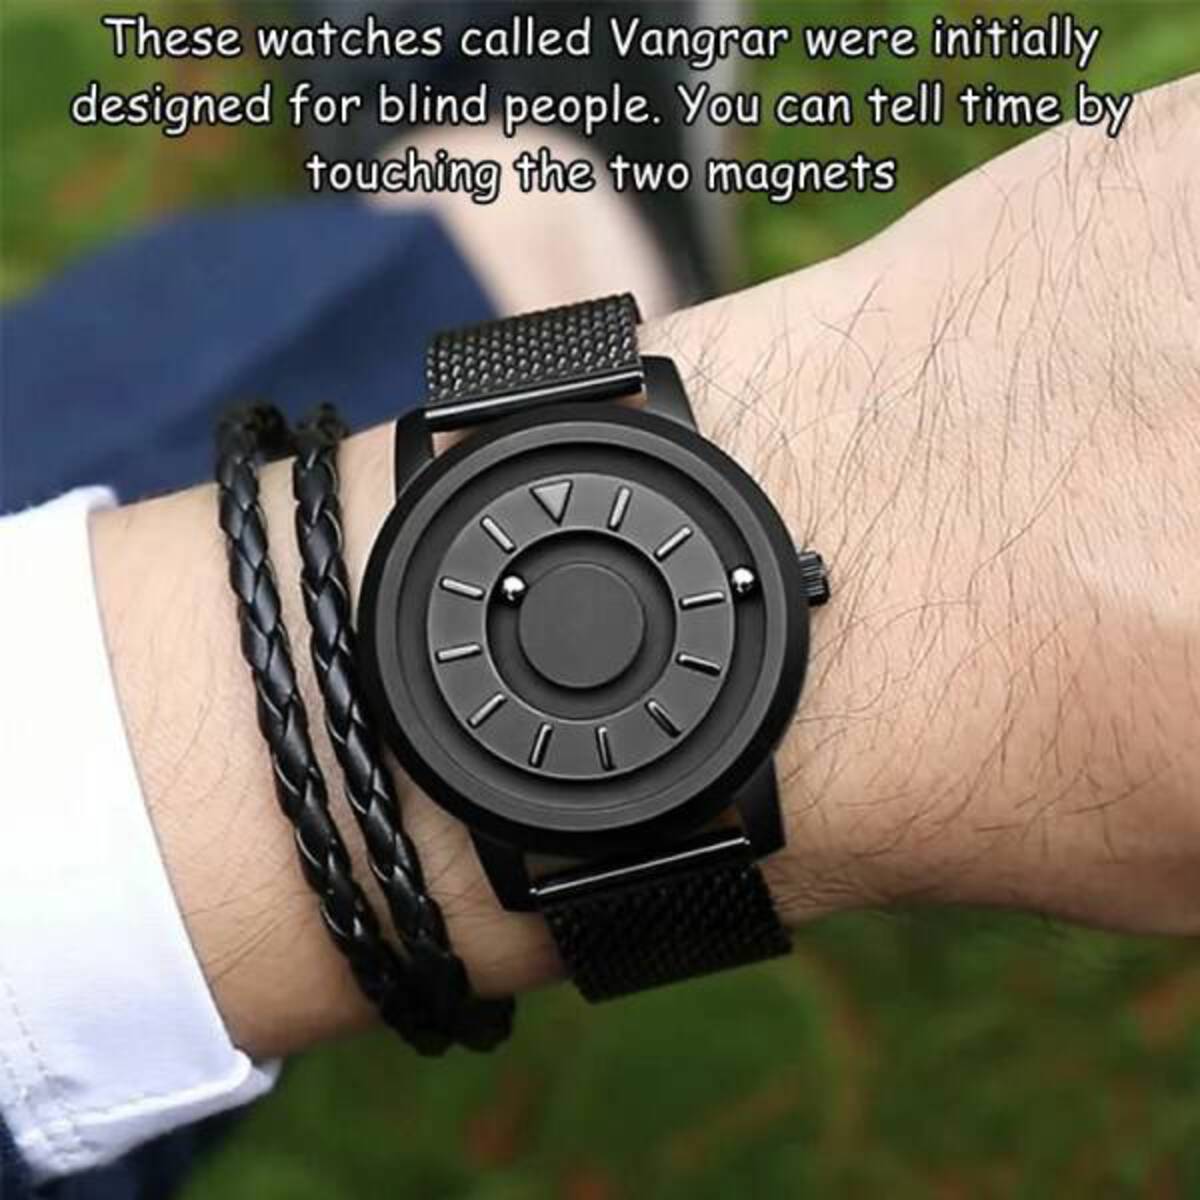 blind watch - These watches called Vangrar were initially designed for blind people. You can tell time by touching the two magnets